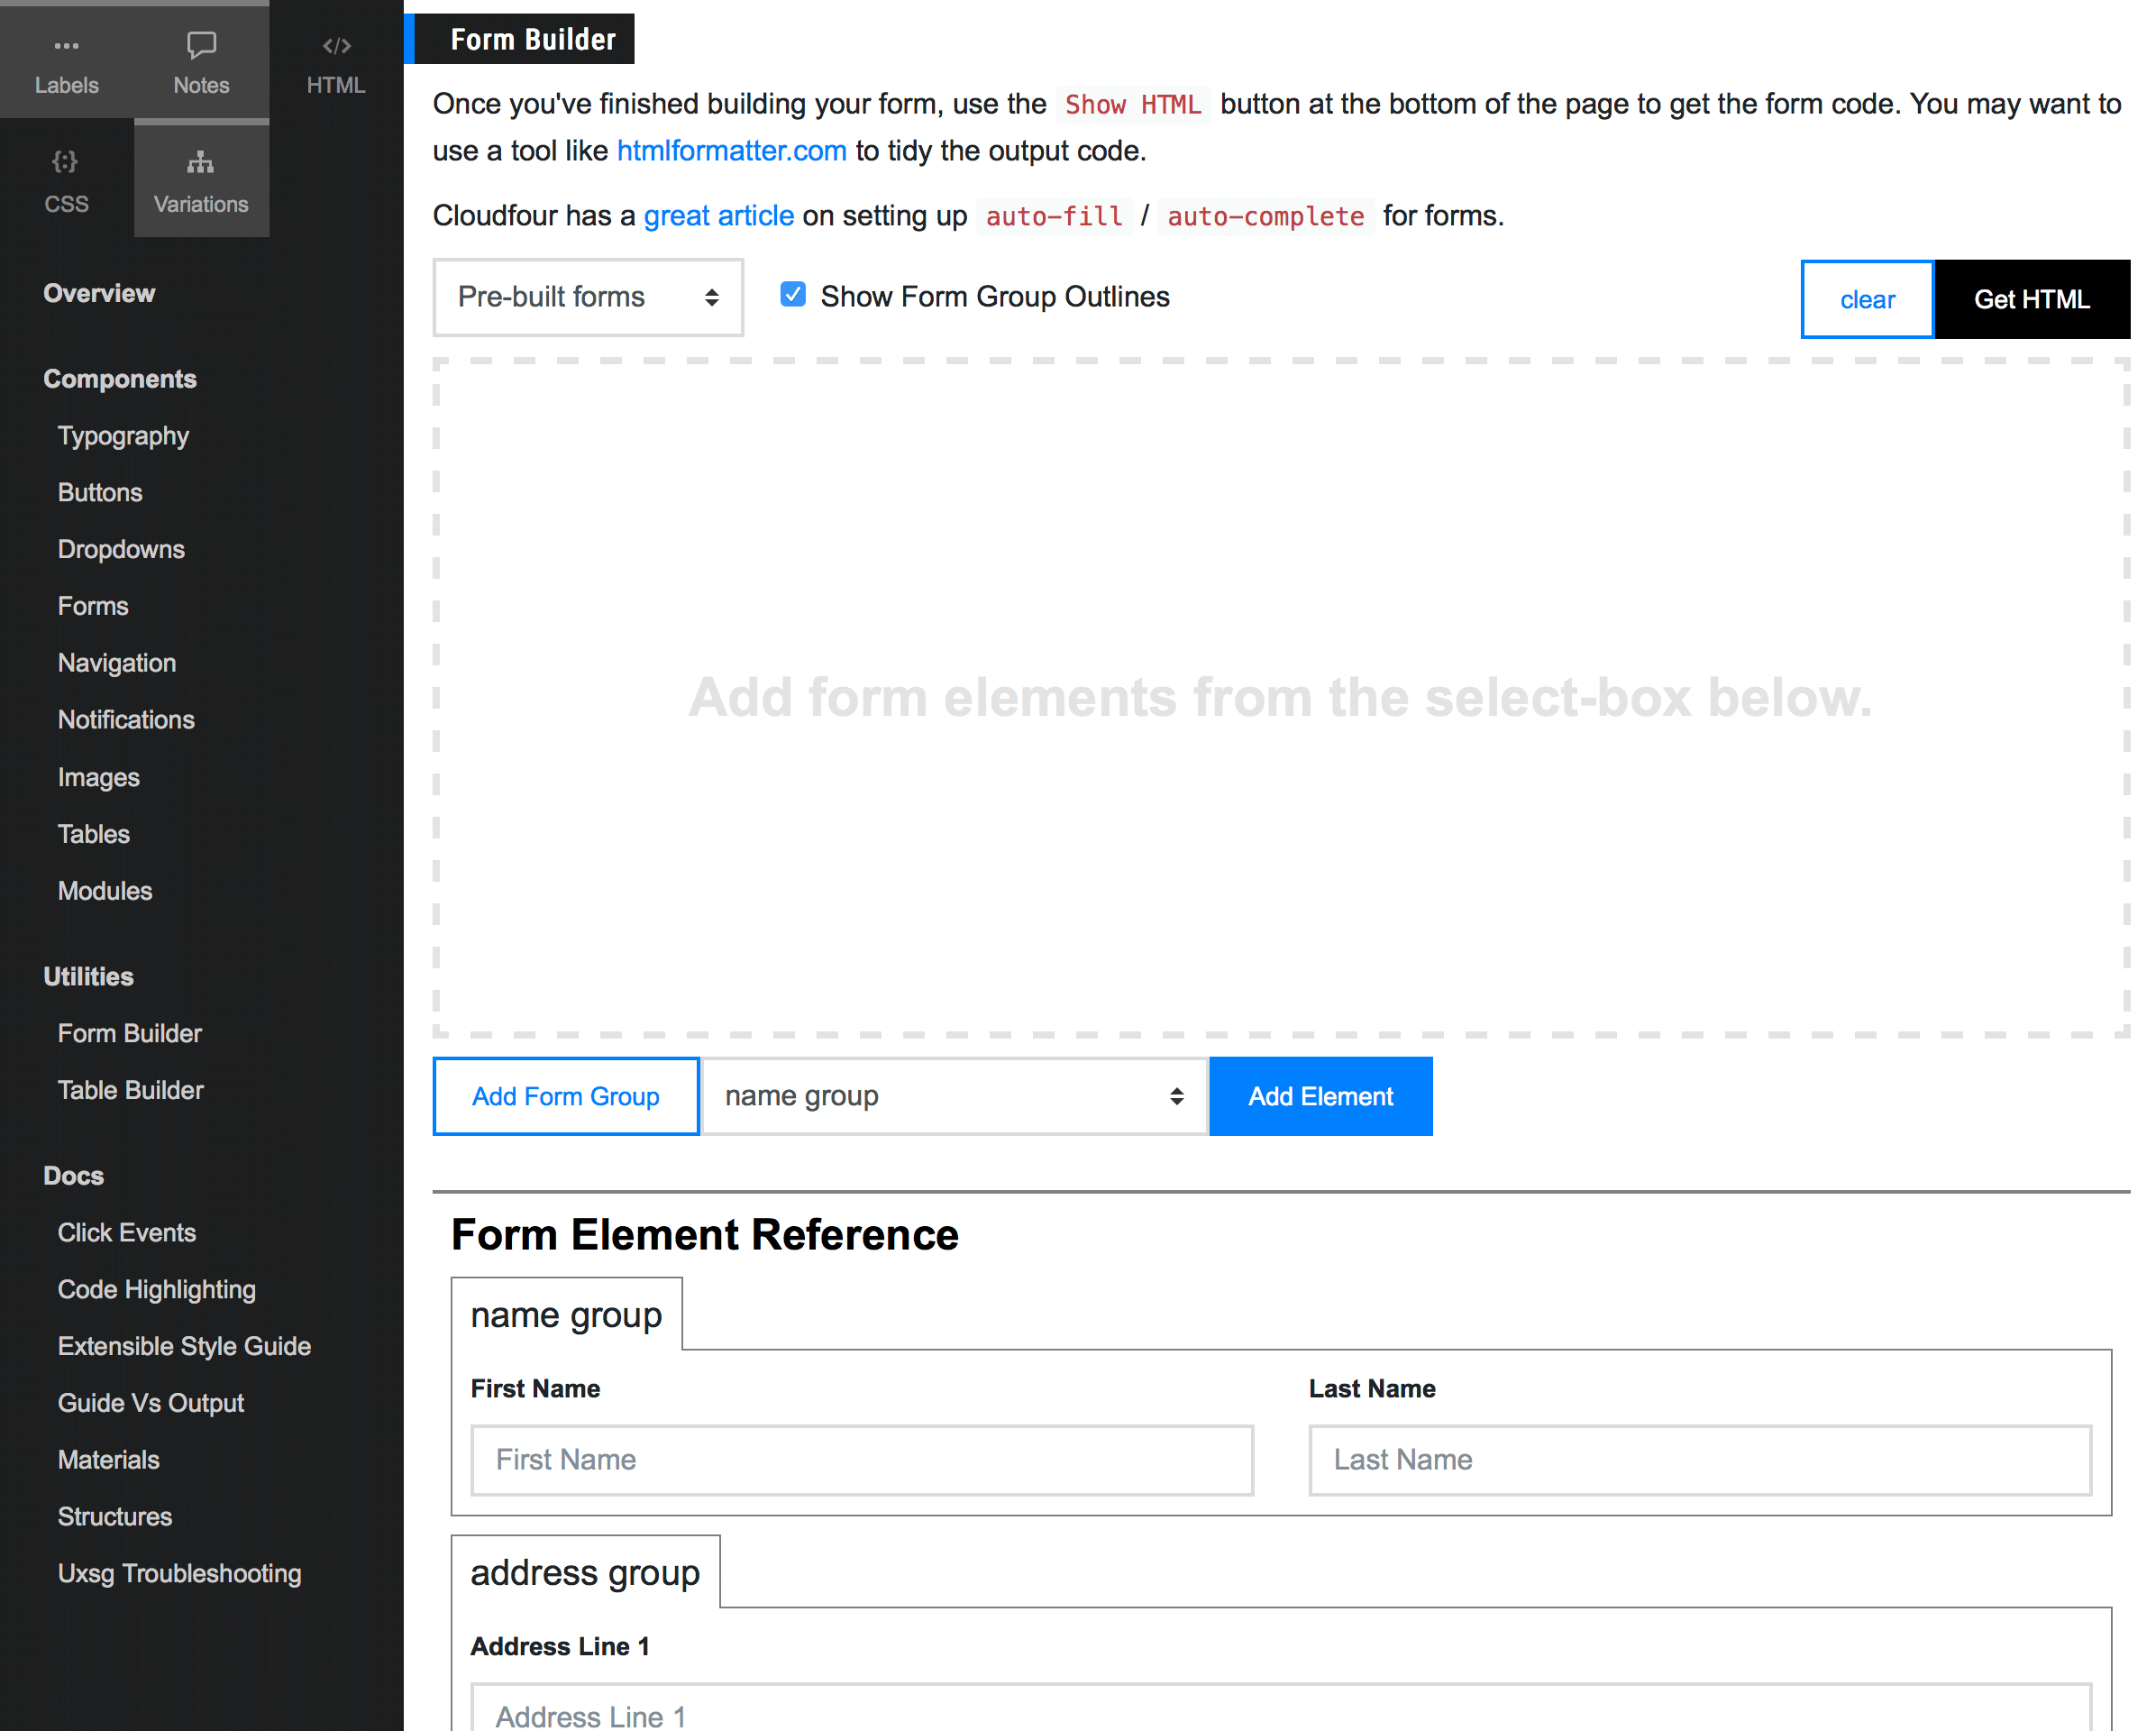 Final Product: Form Builder